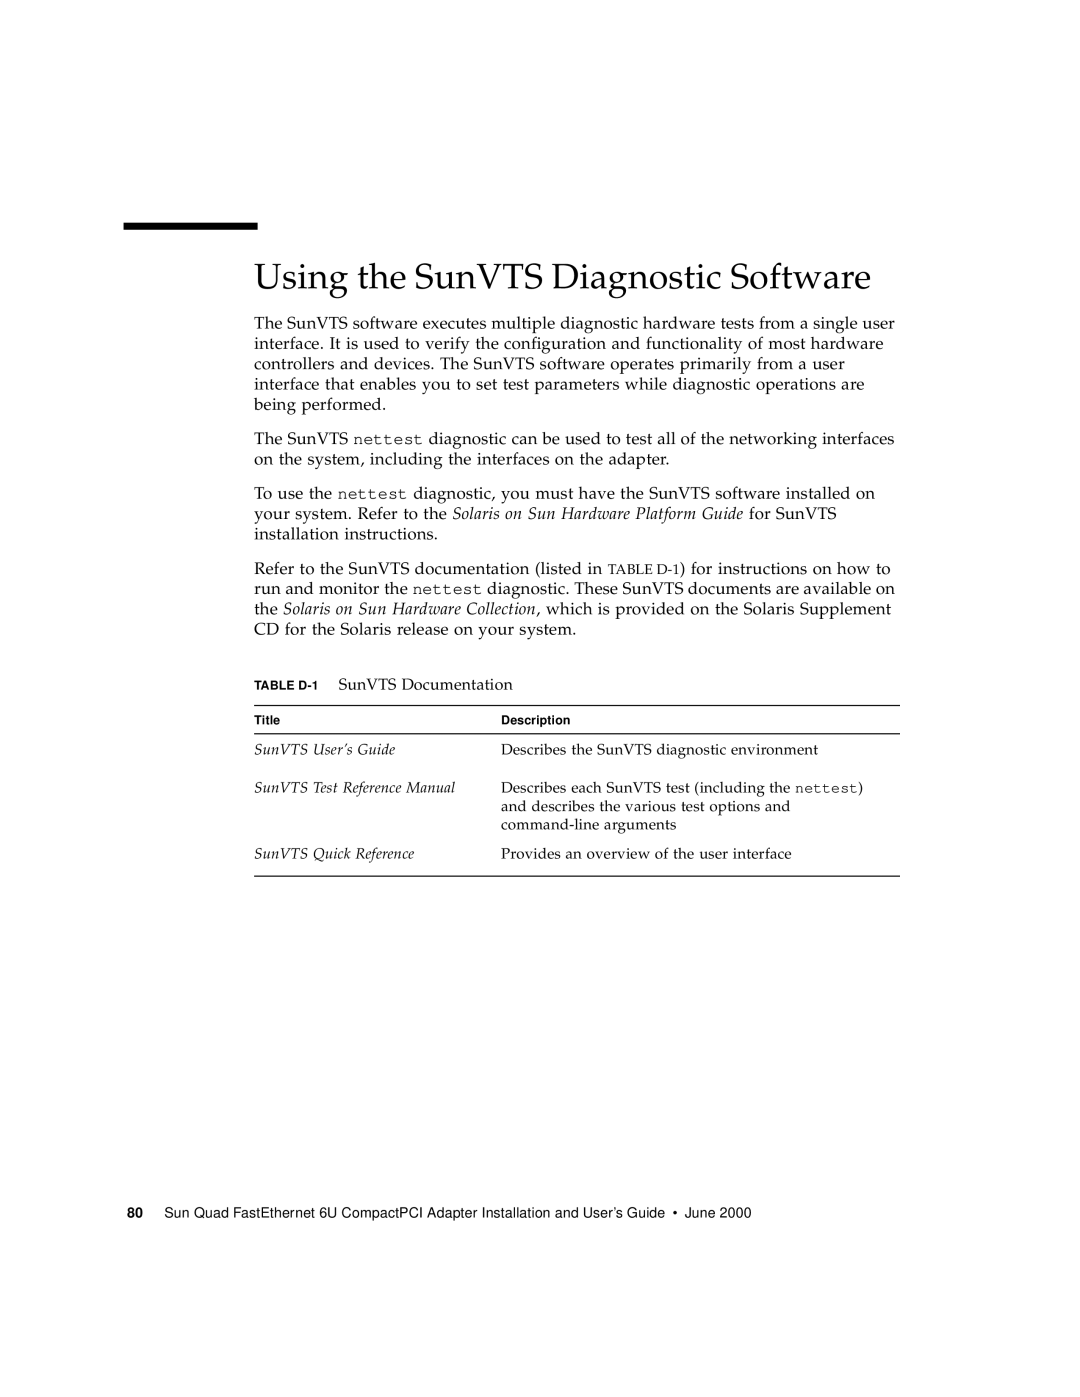 Sun Microsystems 6U manual Using the SunVTS Diagnostic Software, TABLE D-1 SunVTS Documentation 